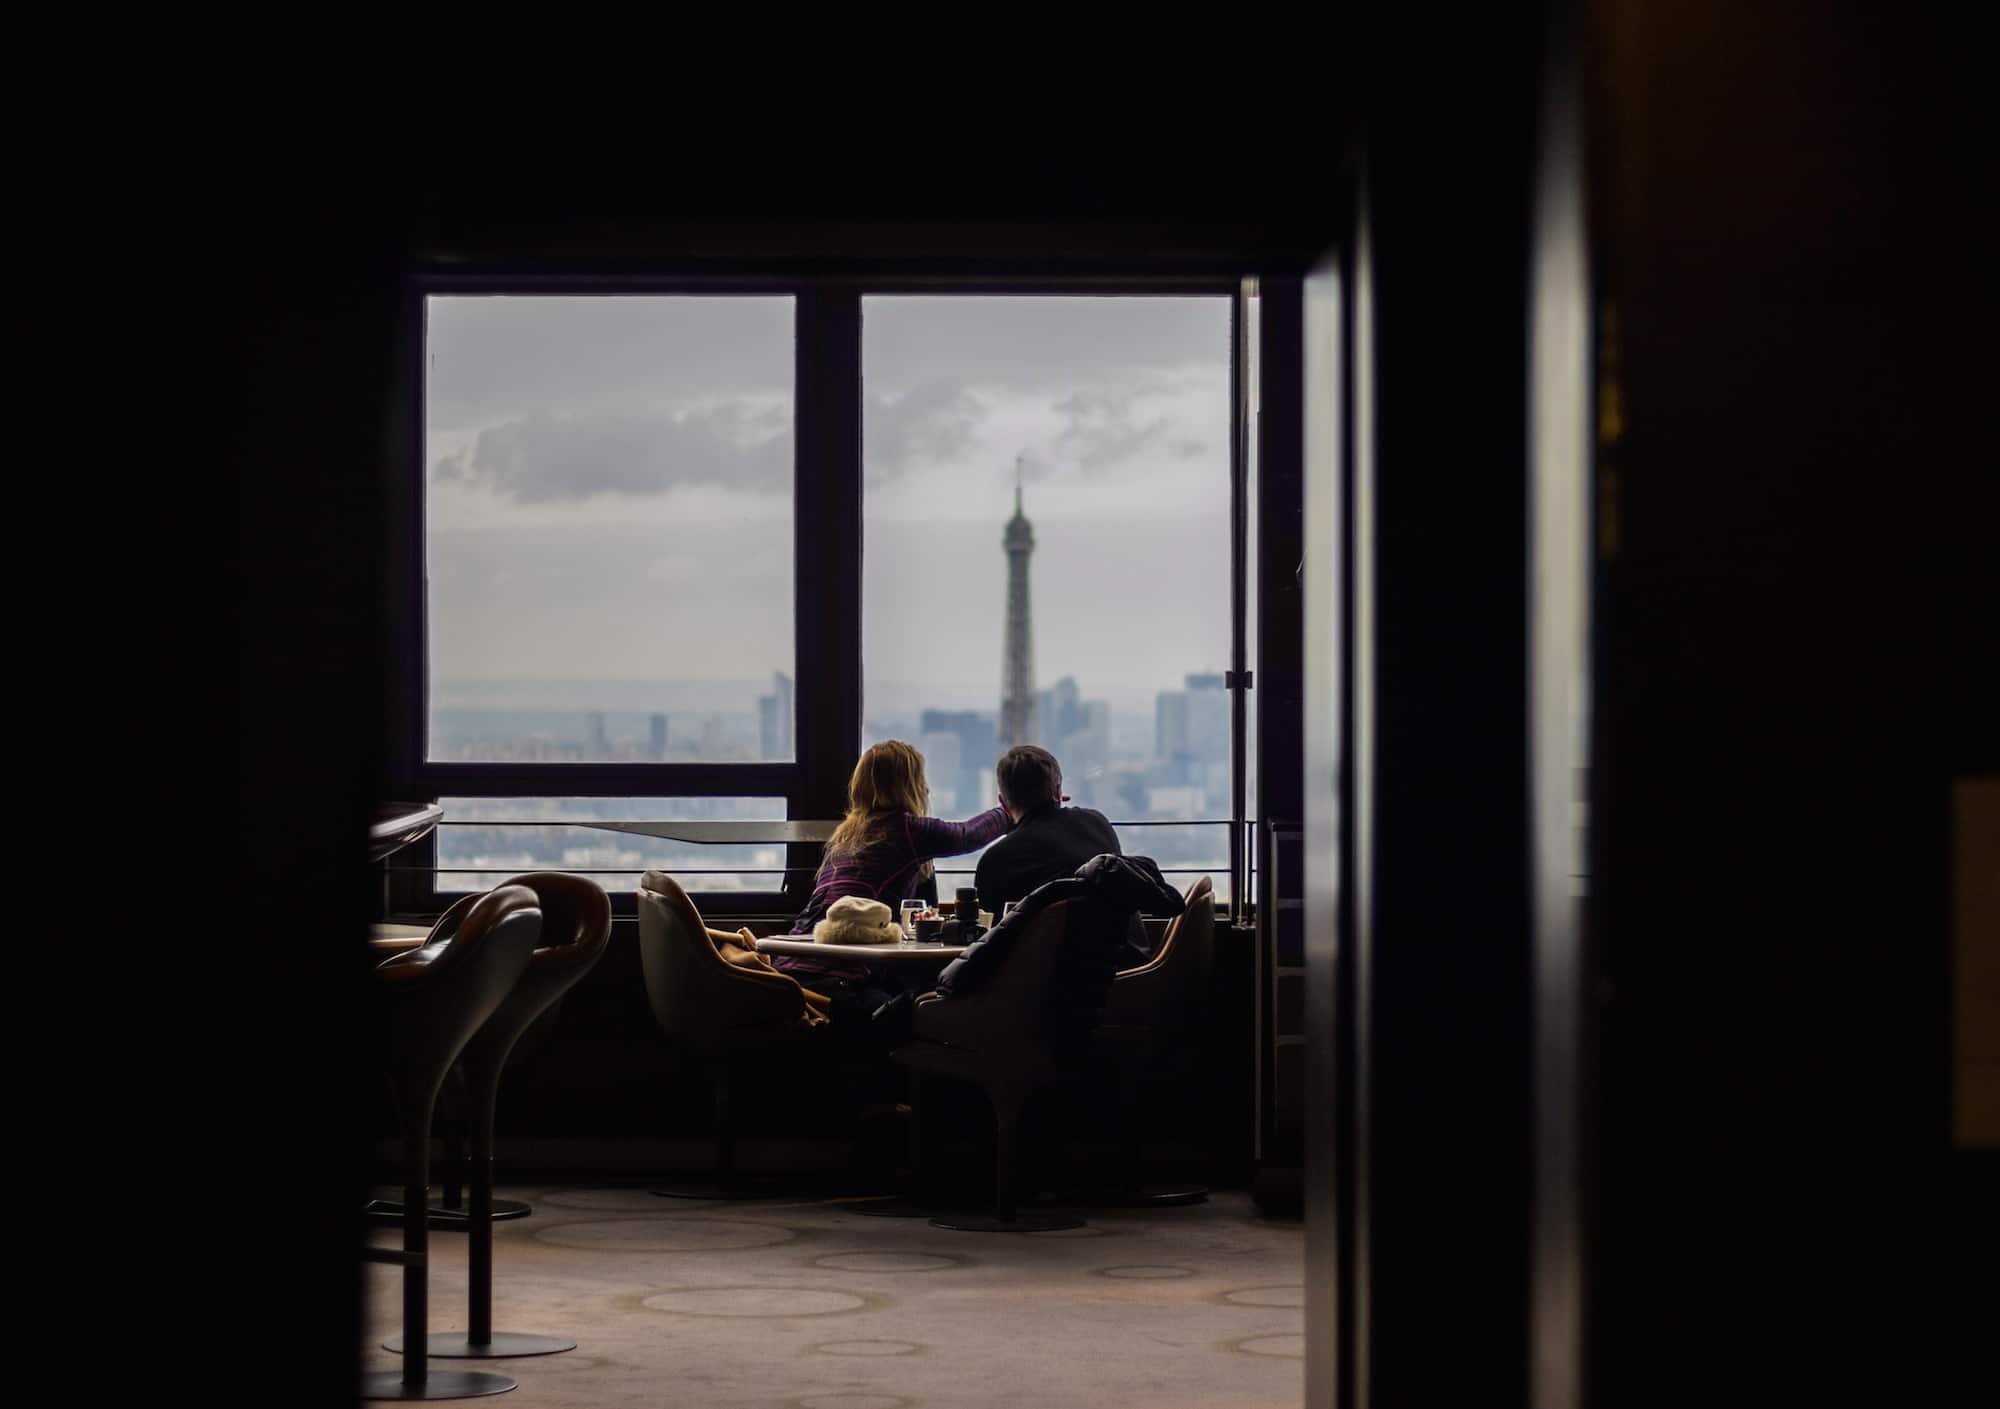 Learning French is easier when you have a French friends you can practise with, like this woman and man having coffee at a café overlooking the Eiffel Tower.